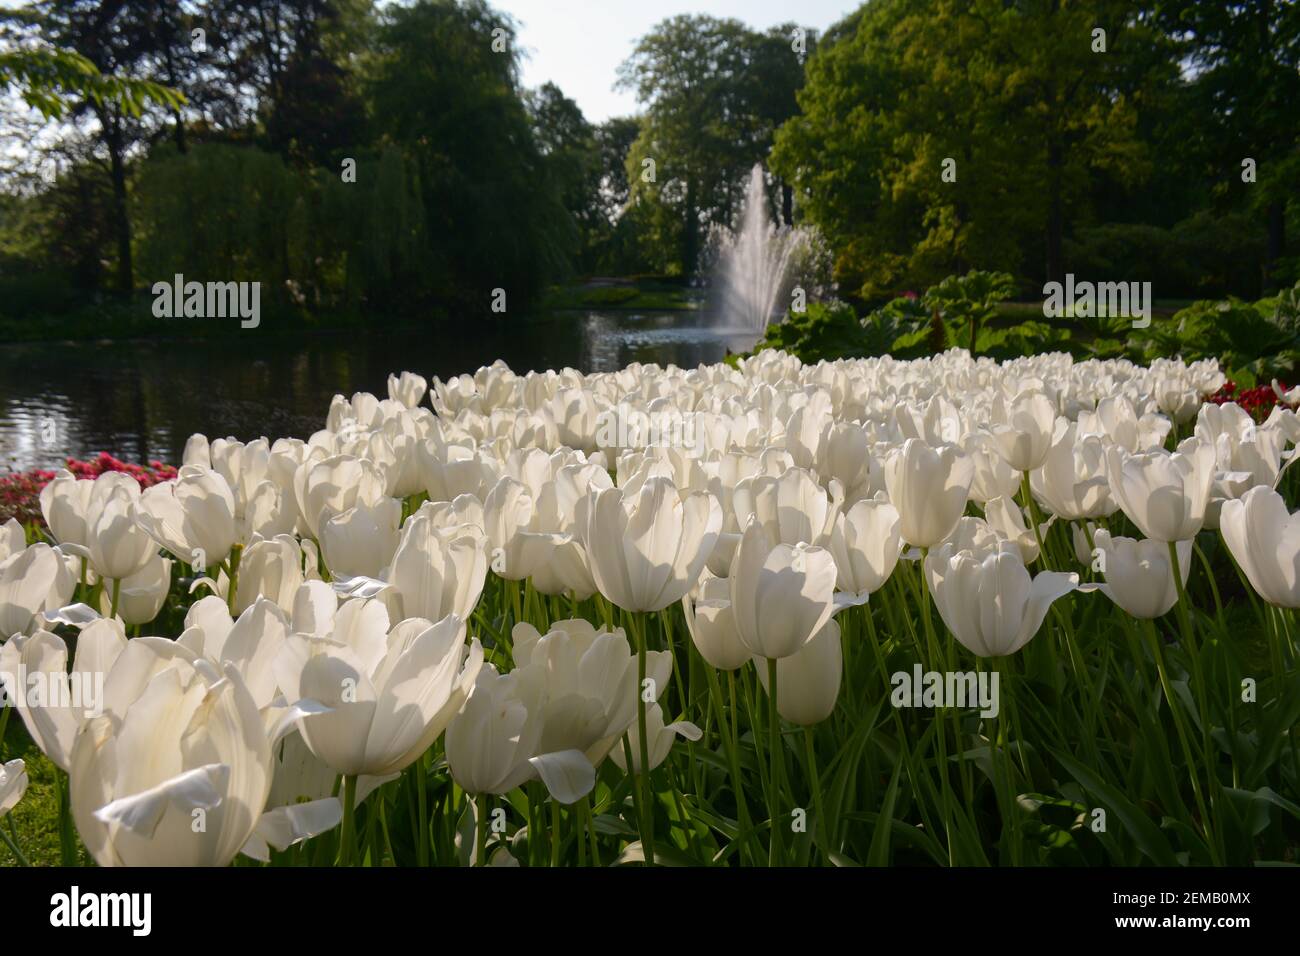 White tulips in full bloom, in the foreground at a garden in Amsterdam, Netherlands. Stock Photo